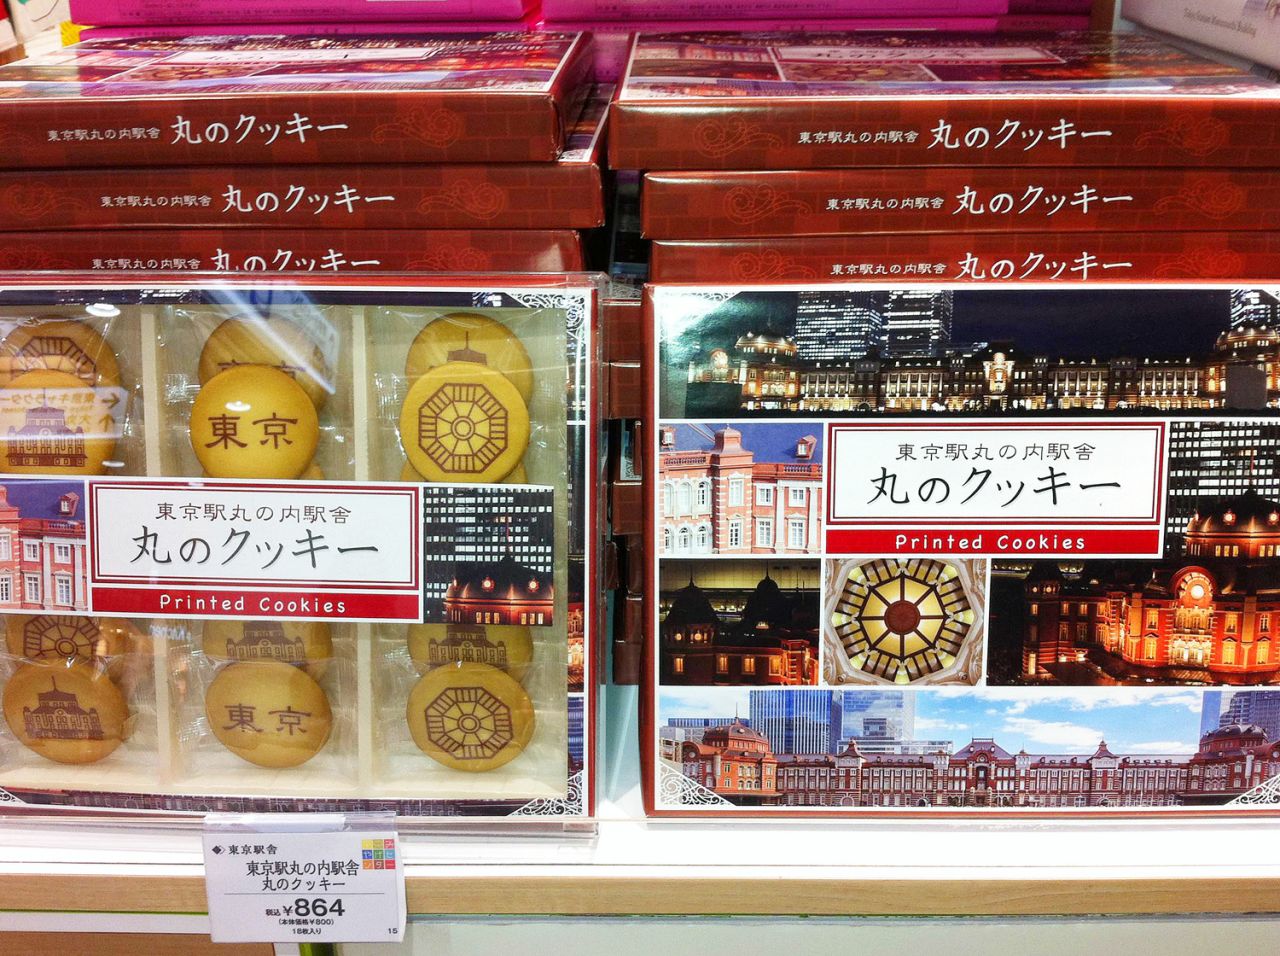 Train company JR East operates a Travel Service Center at Marunouchi's north exit offering currency exchange and a luggage storage counter. Fans of the station's achitecture can buy cookies printed with the Marunouchi Gate.